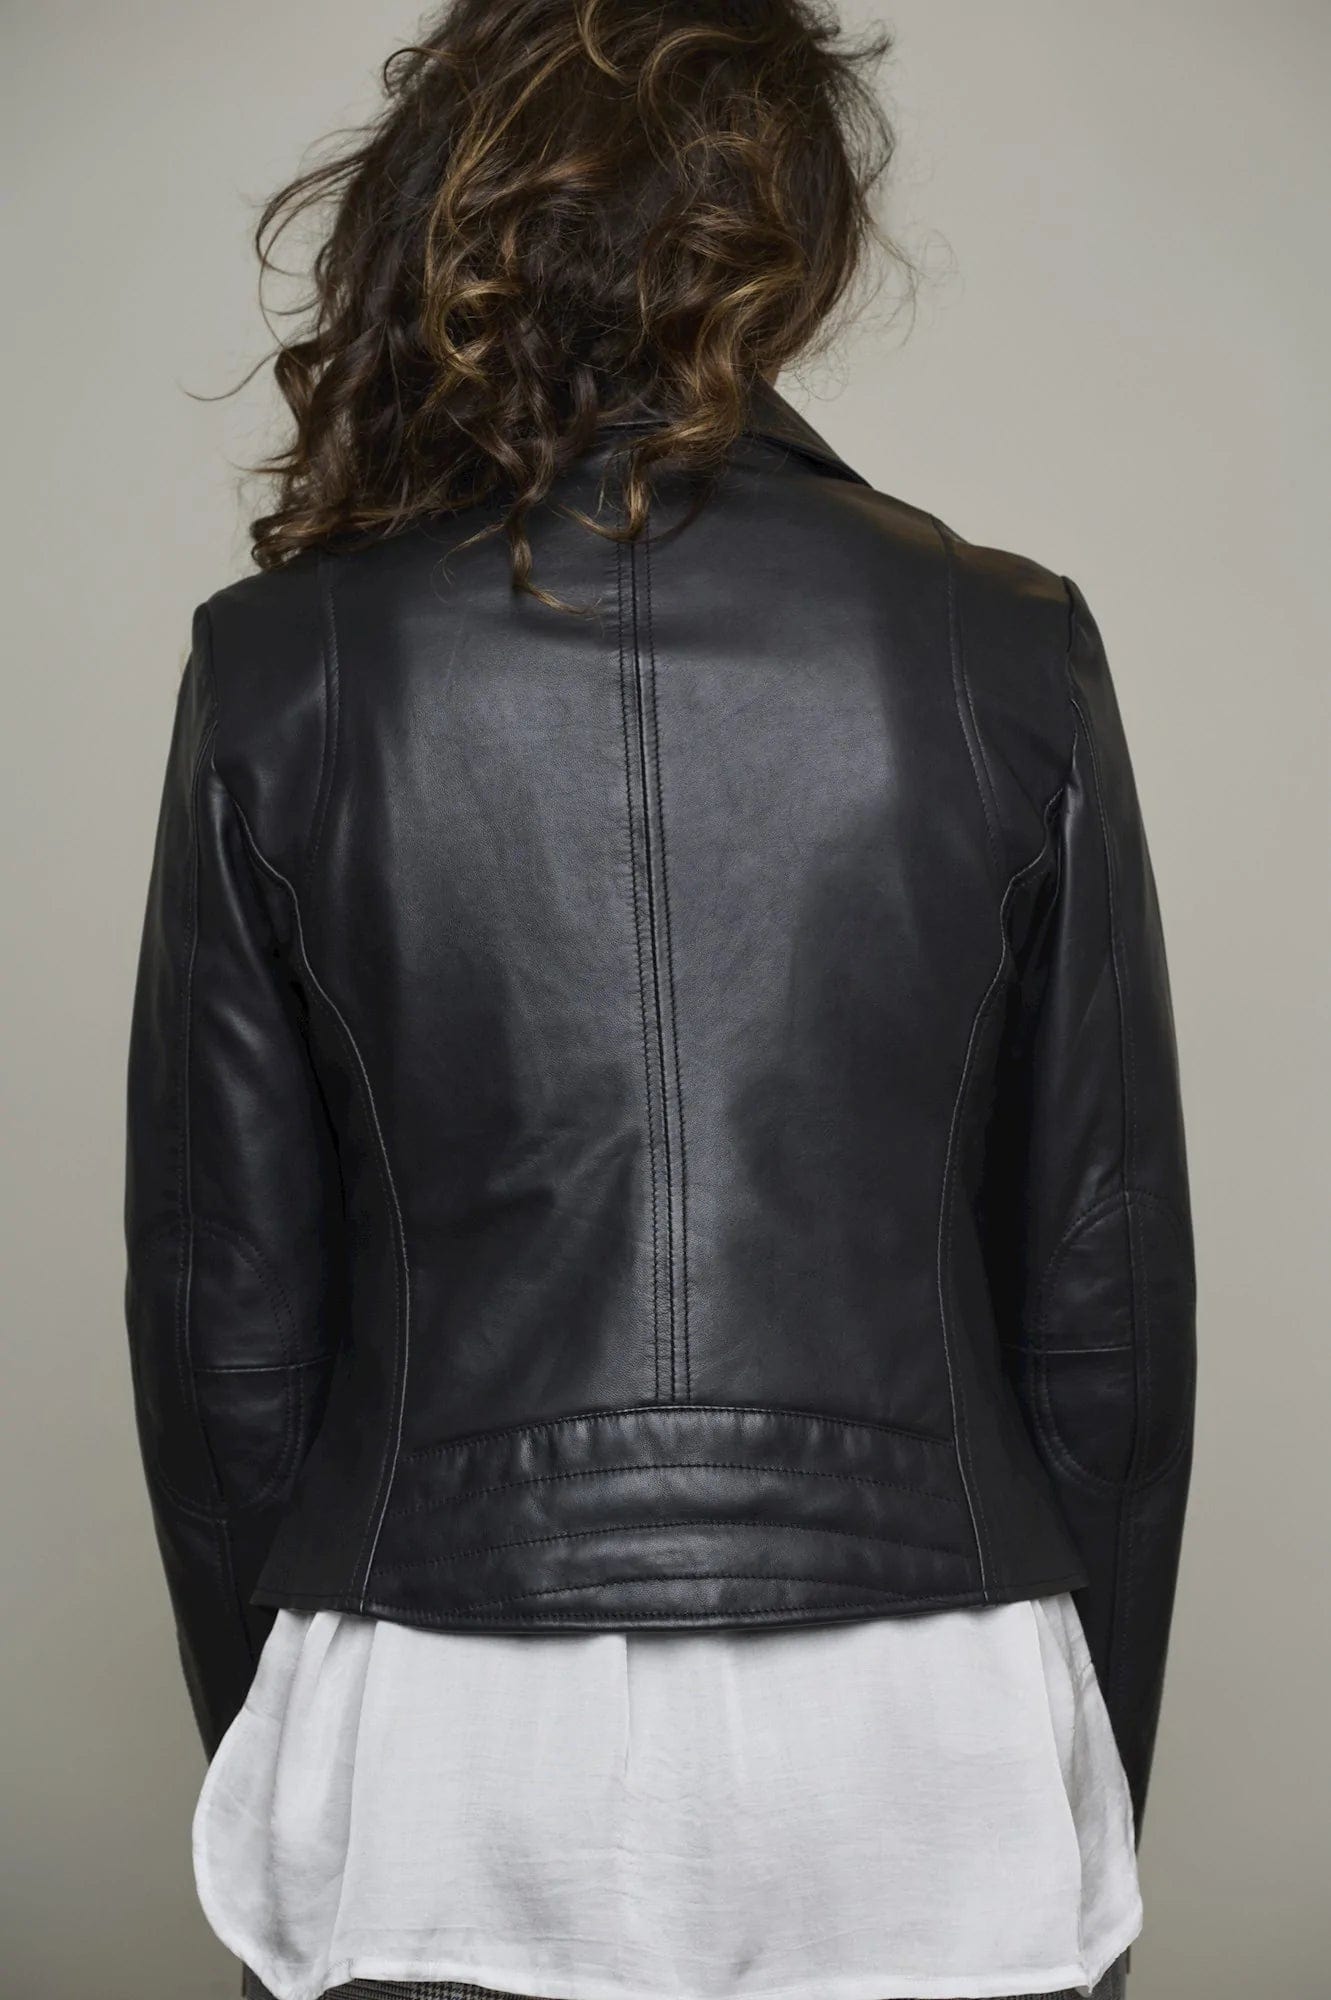 Soft Leather Biker Jacket = This jacket is to order and delivery is within 7-10 days